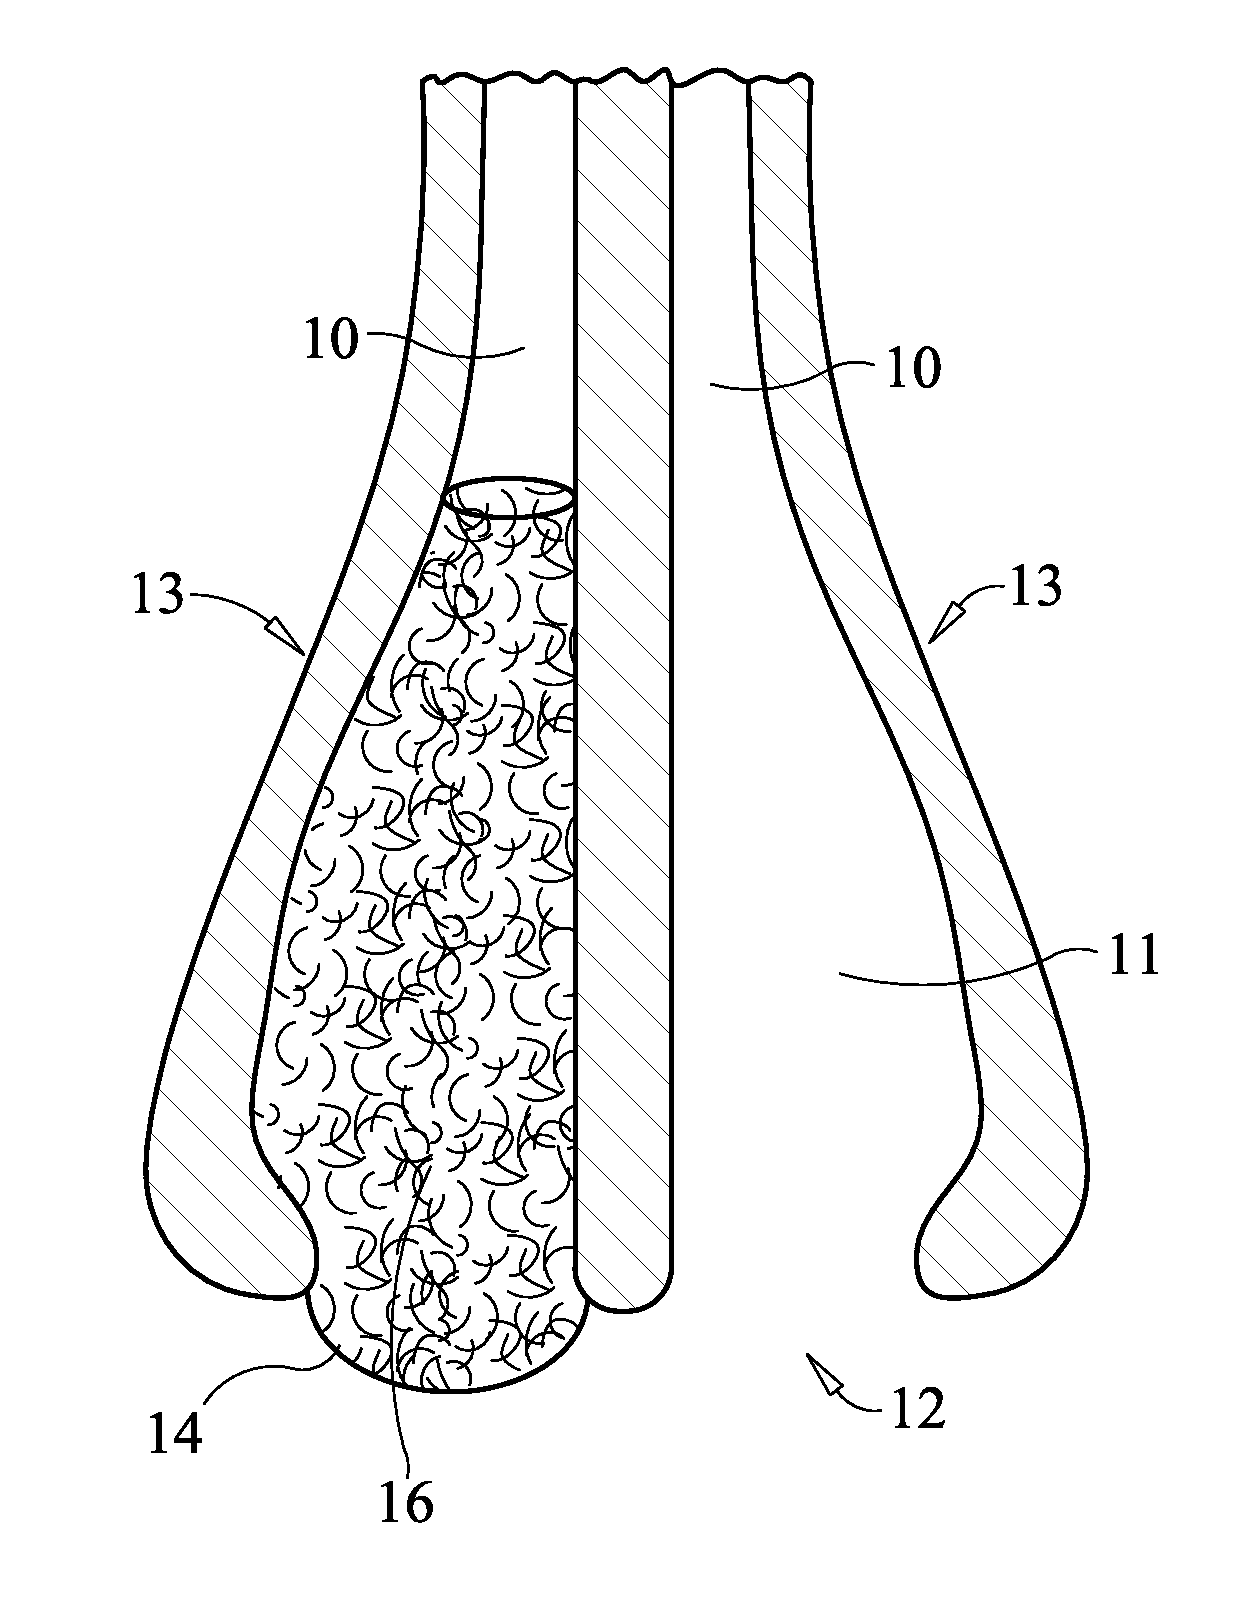 Intra-nasal air filtration devices and methods